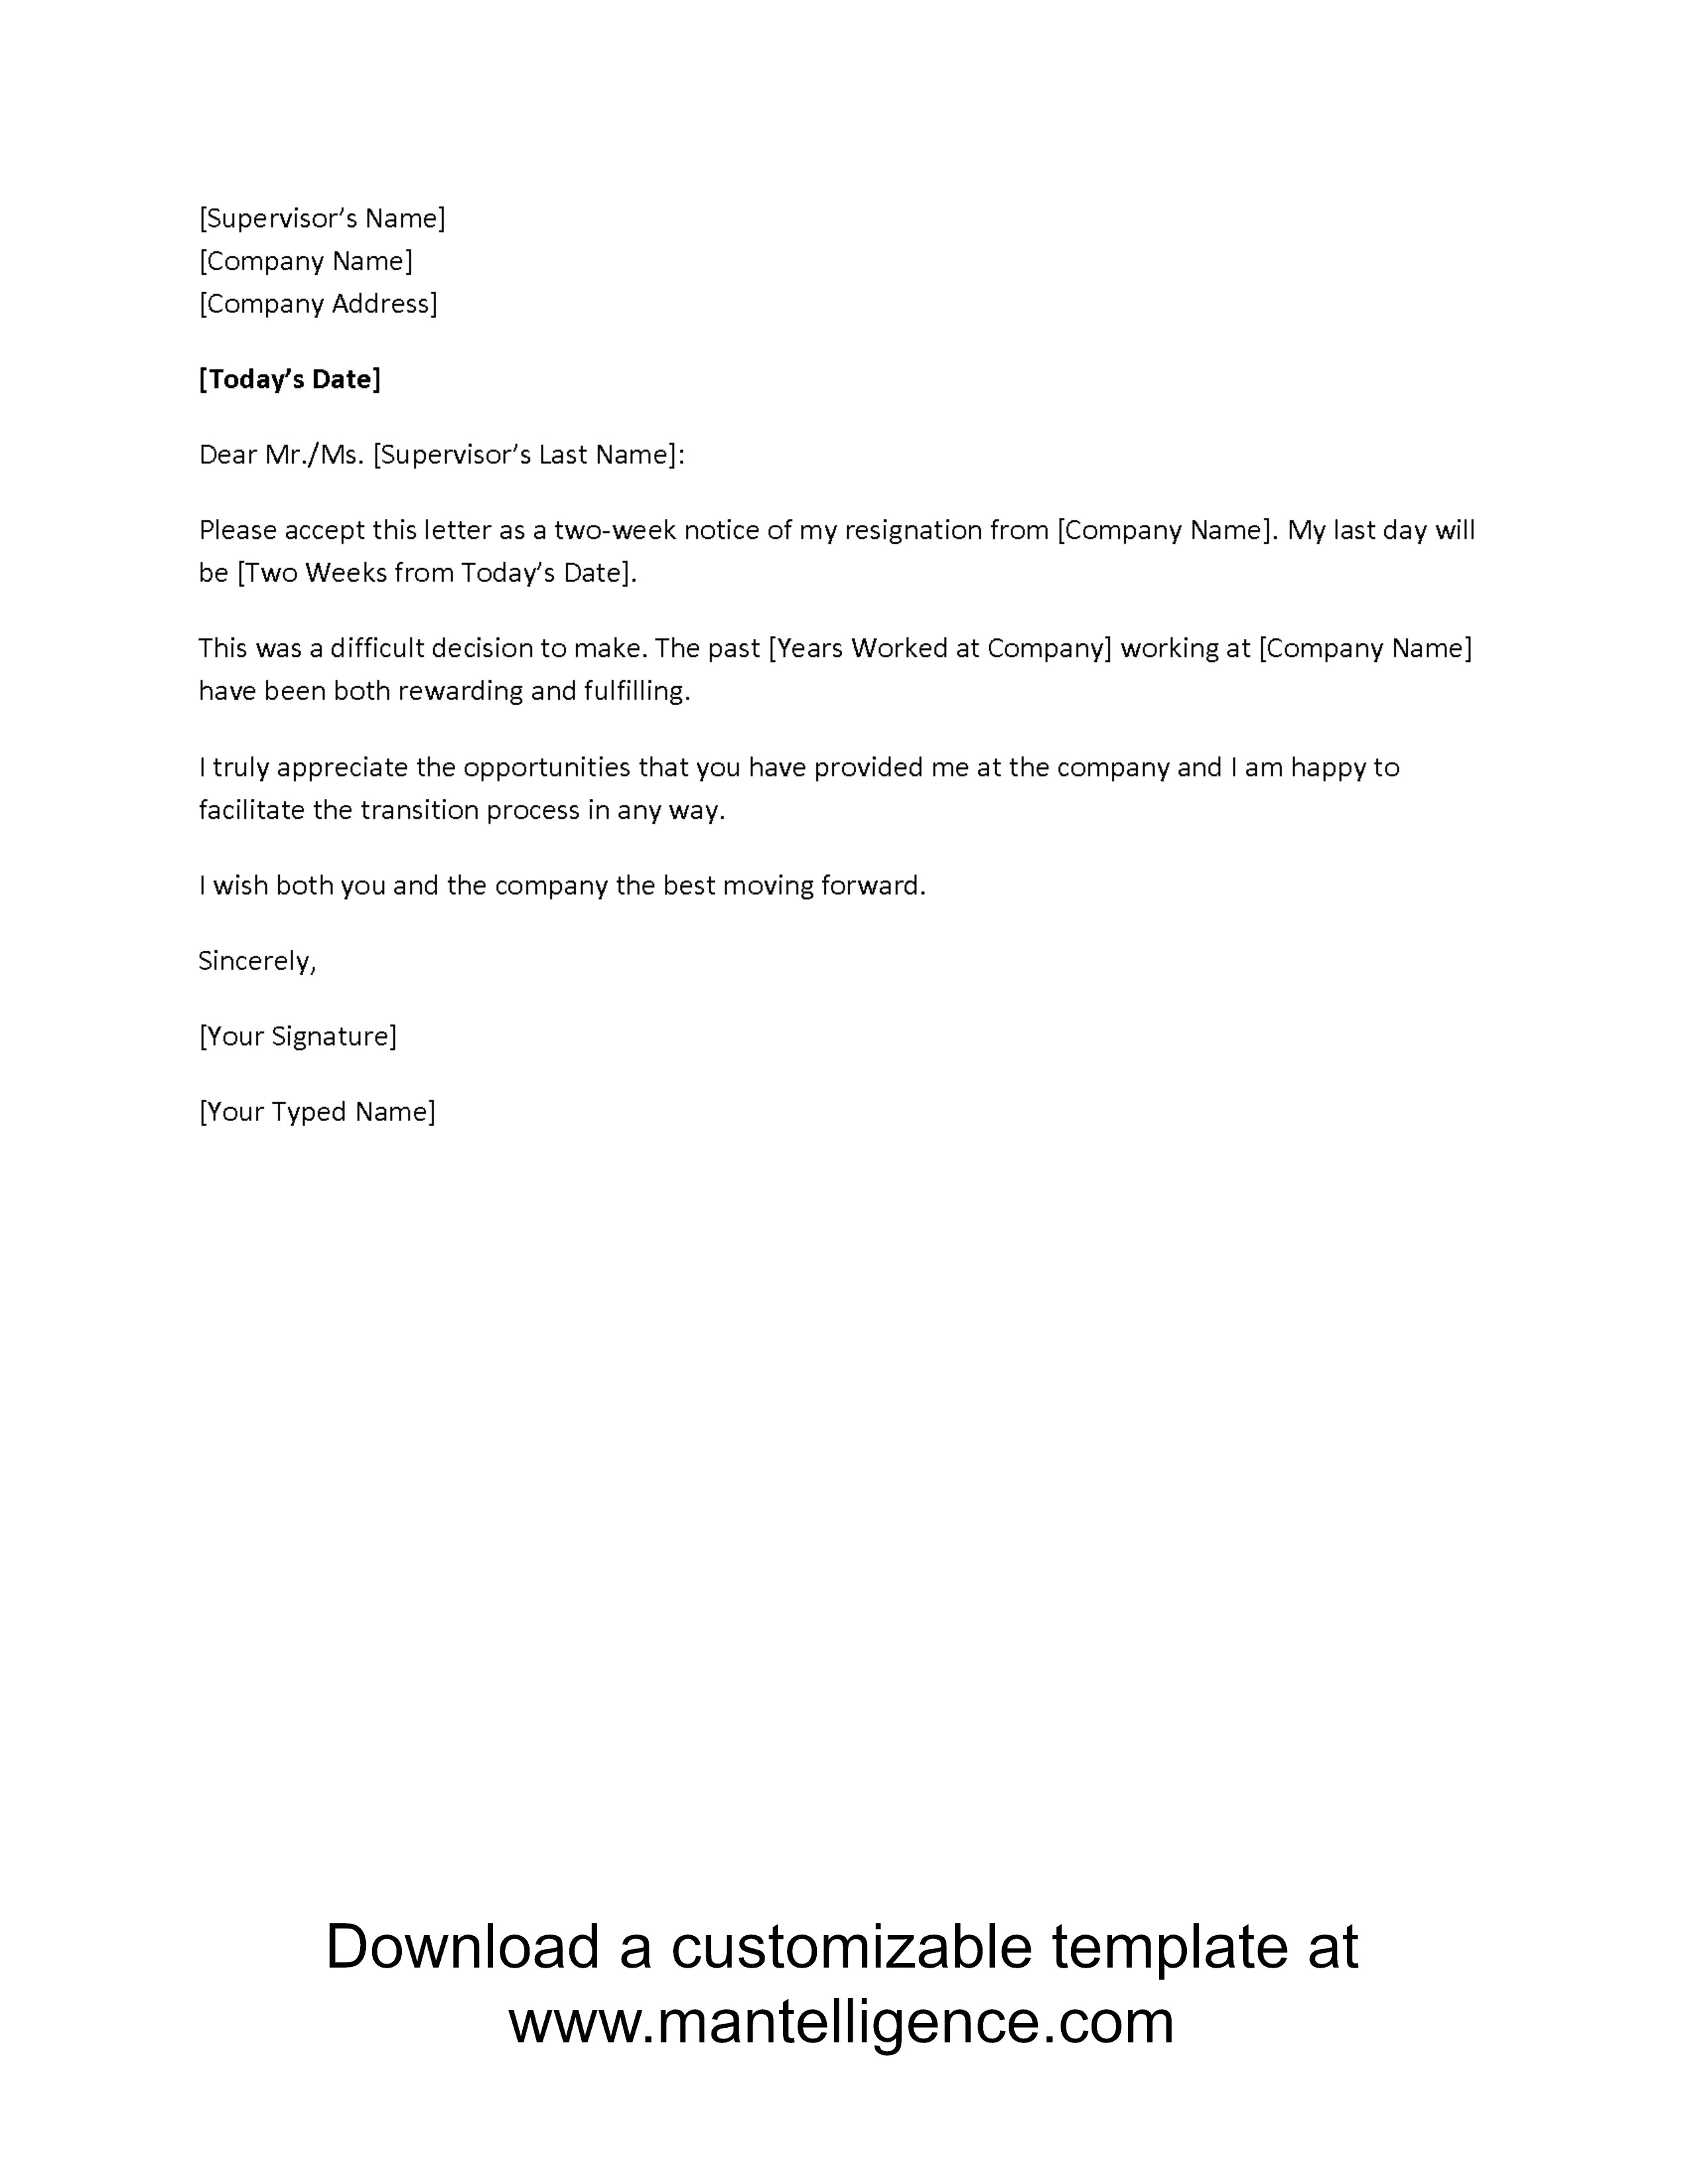 2 weeks notice letter templates